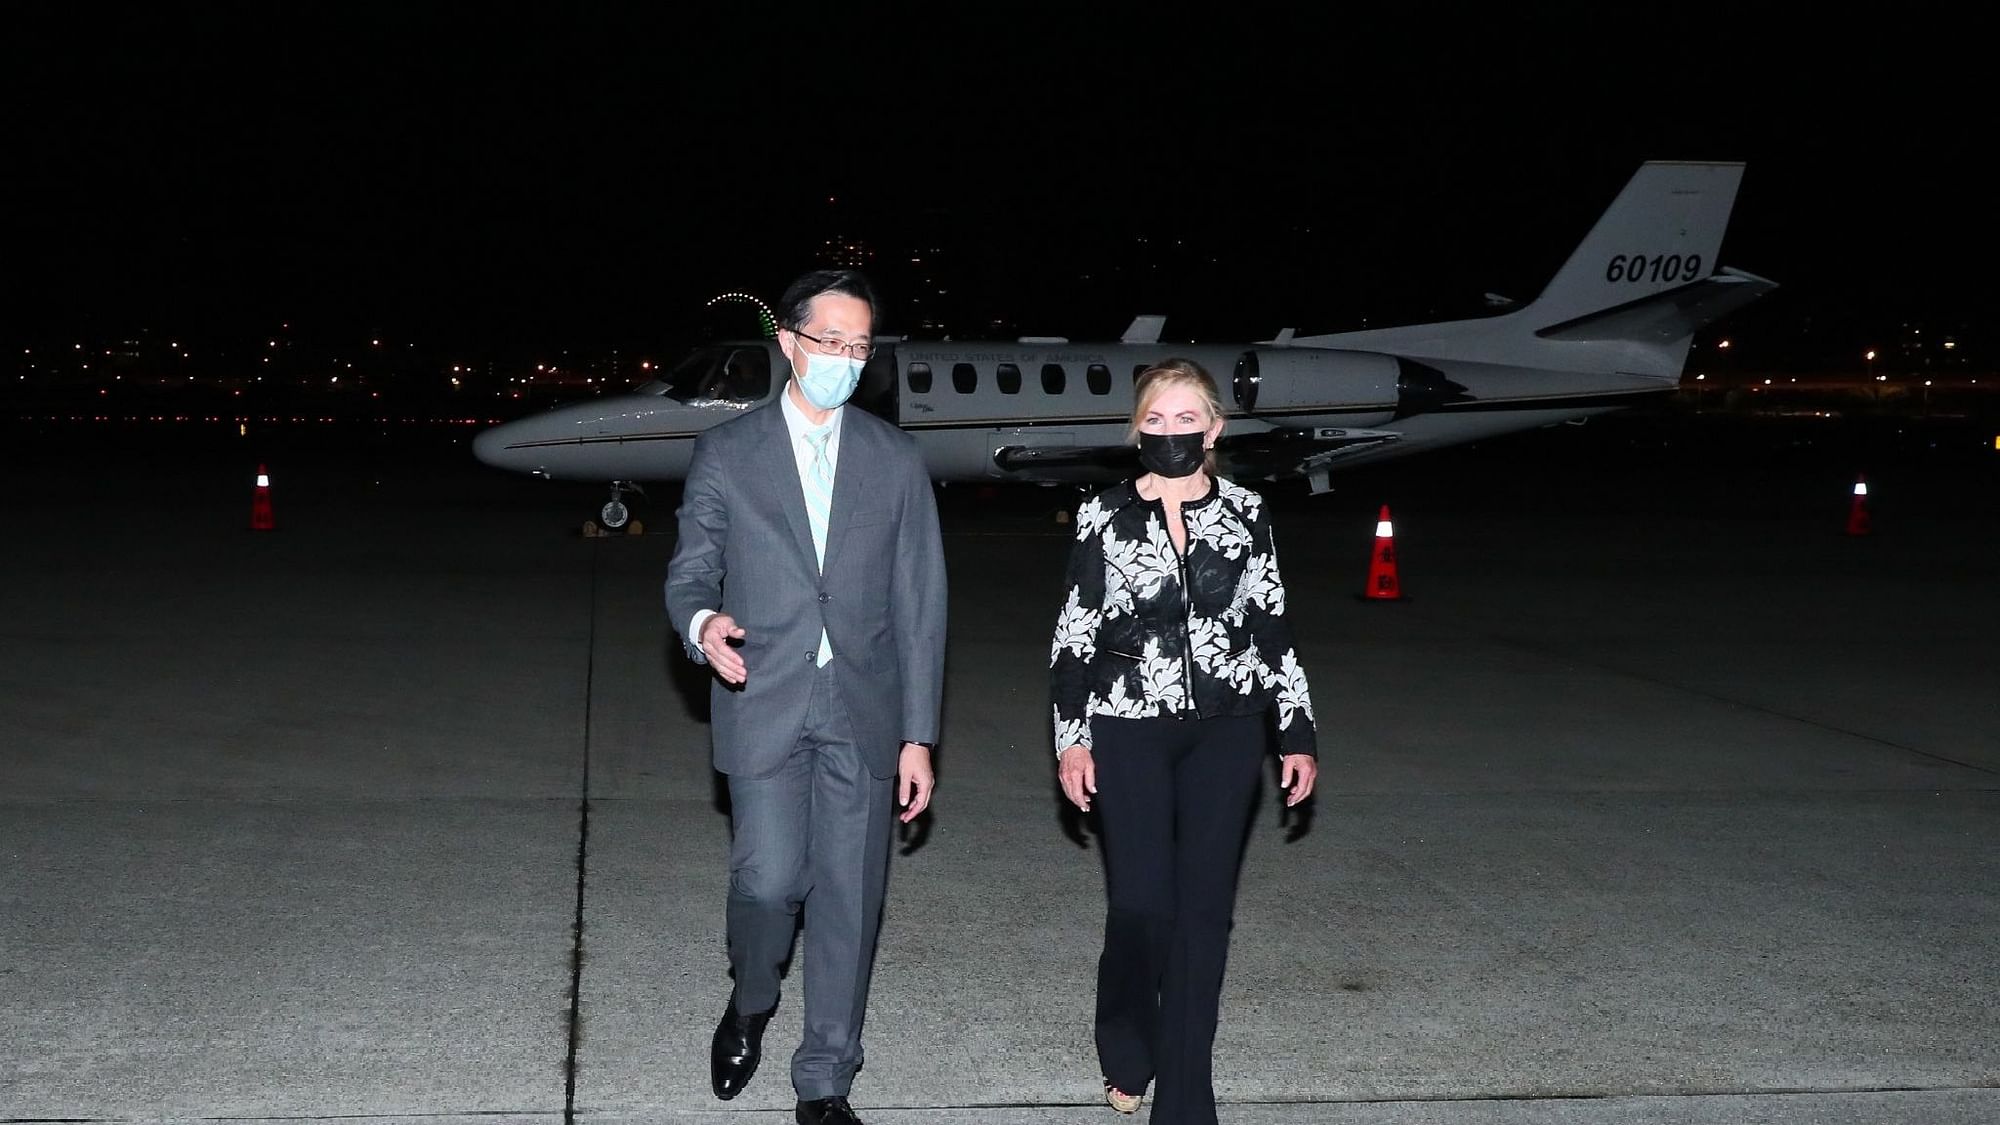 <div class="paragraphs"><p>Blackburn was welcomed on the airport tarmac by Douglas Hsu, director general of Taiwan's foreign affairs ministry, Blackburn's office said.</p></div>